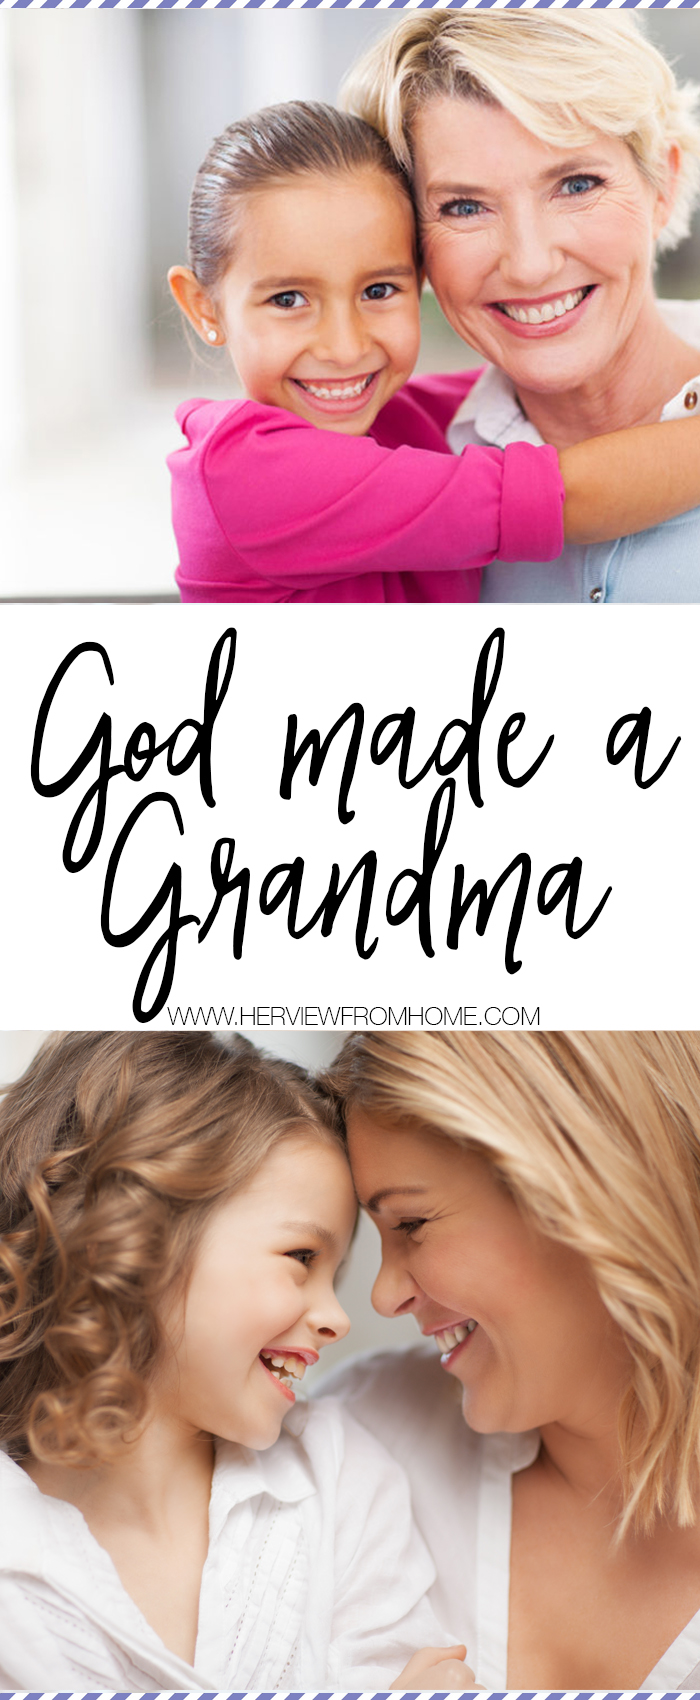 God had to have somebody willing to break the rules behind mama's back and yet know her limits and then say "Mommy said, 'No,'" with a grimace and a wink. So God made a Grandma.  